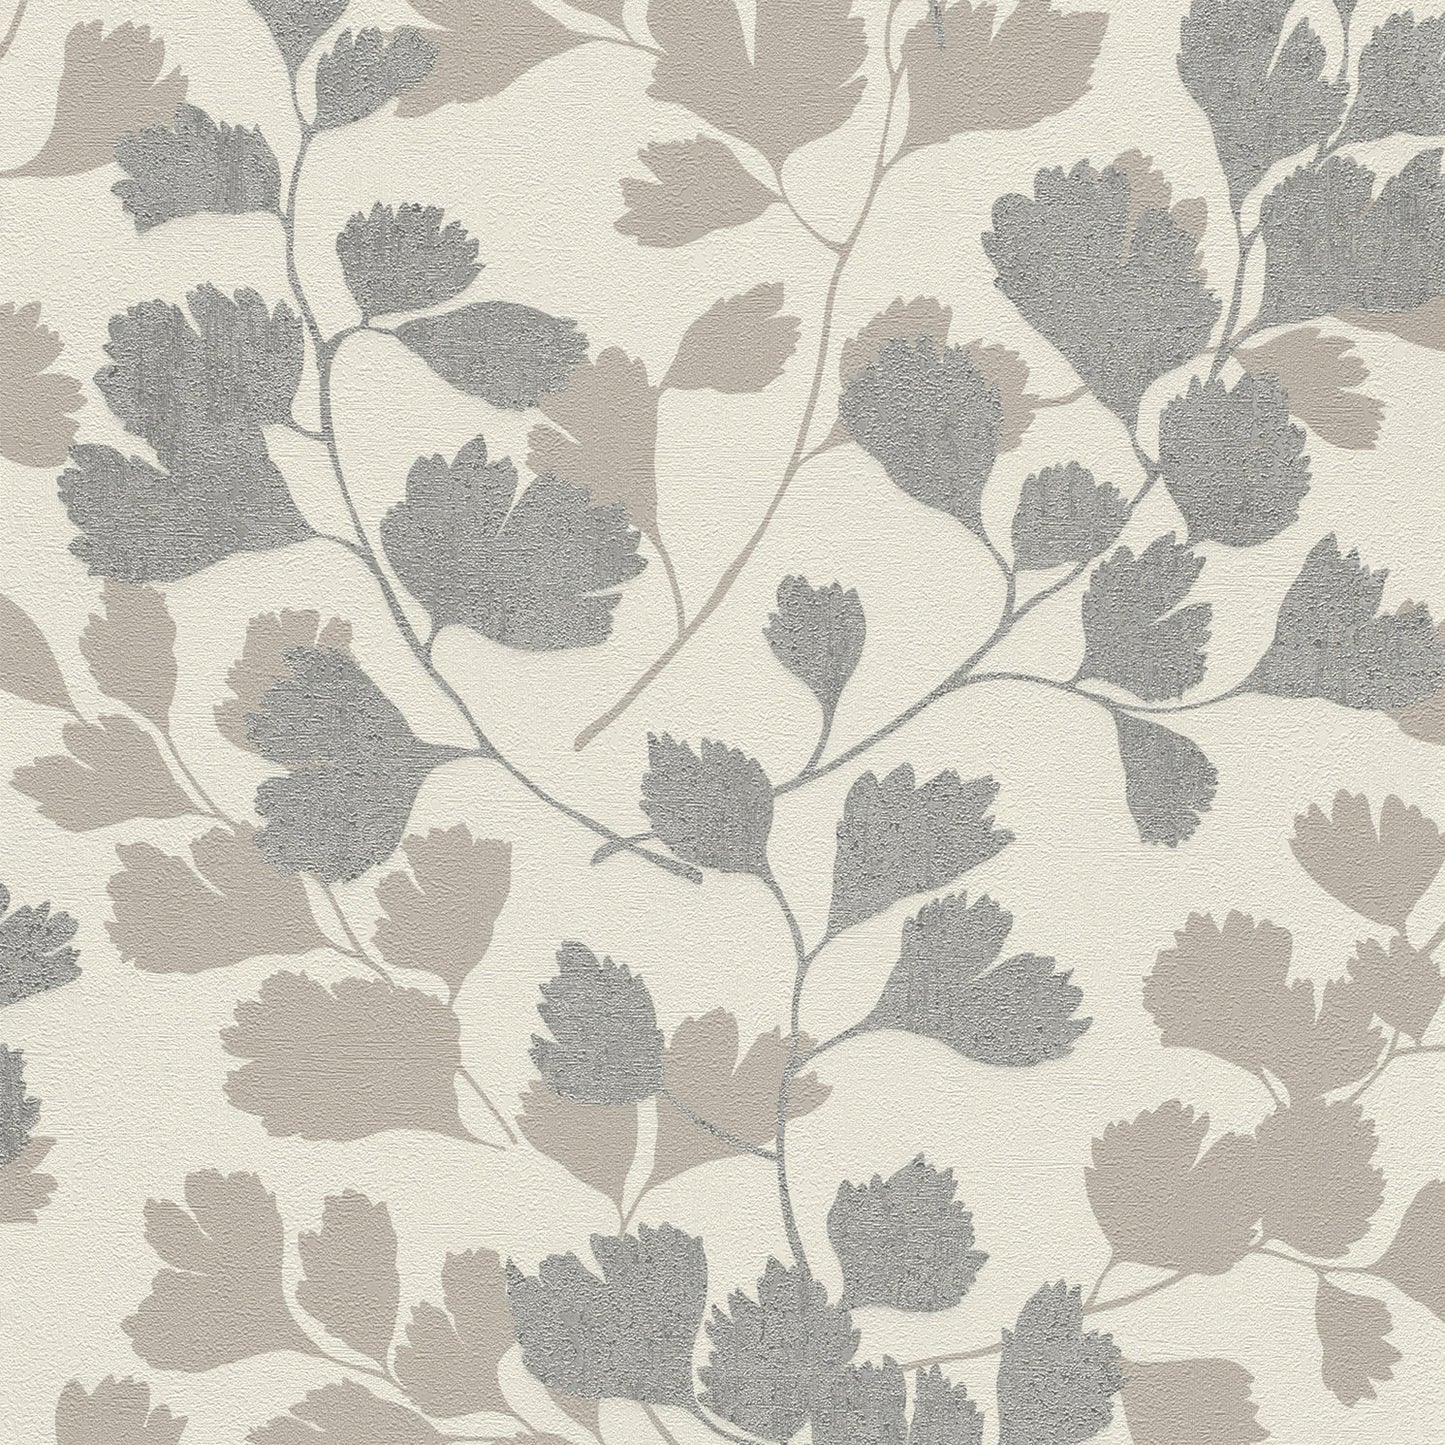 Select 2836-490831 Shades of Grey Neutrals Leaf Wallpaper by Advantage